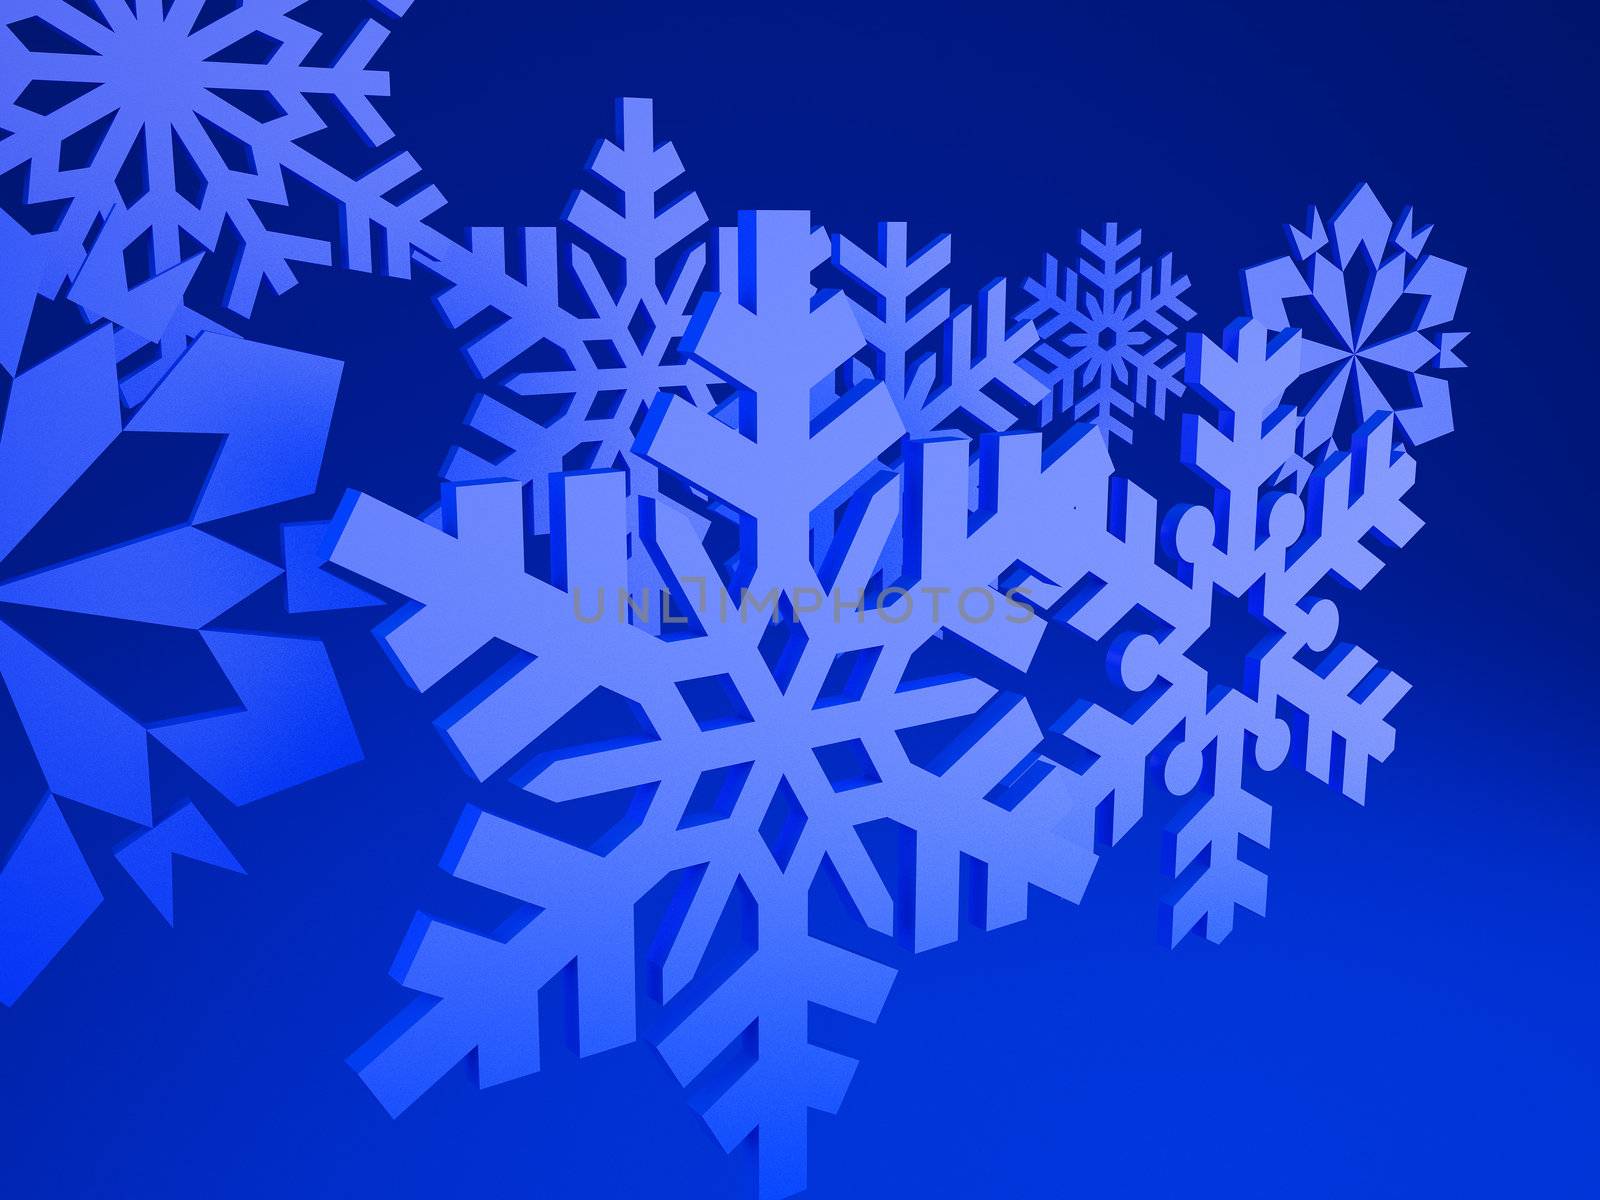 Snowflake on a blue background. High resolution image. 3d rendered illustration.